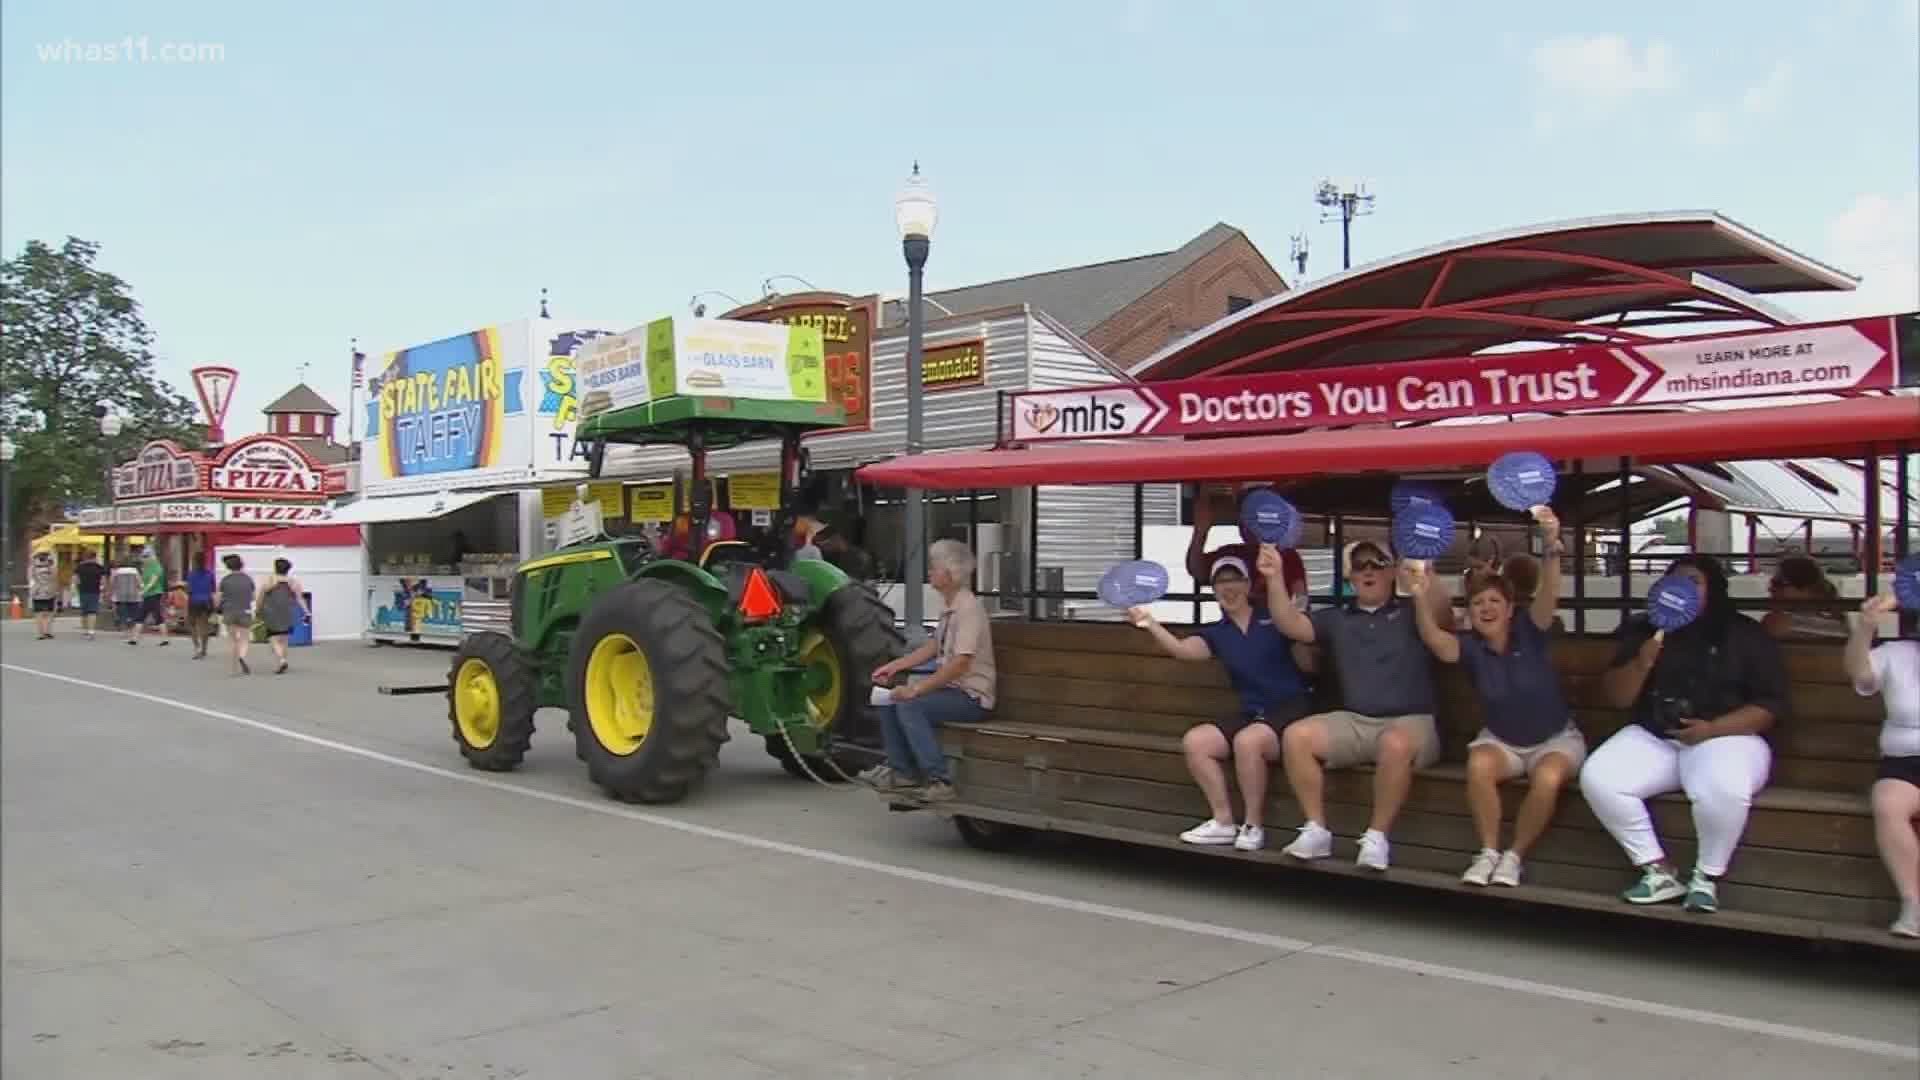 The Indiana State fair has been canceled for this summer due to coronavirus concerns.